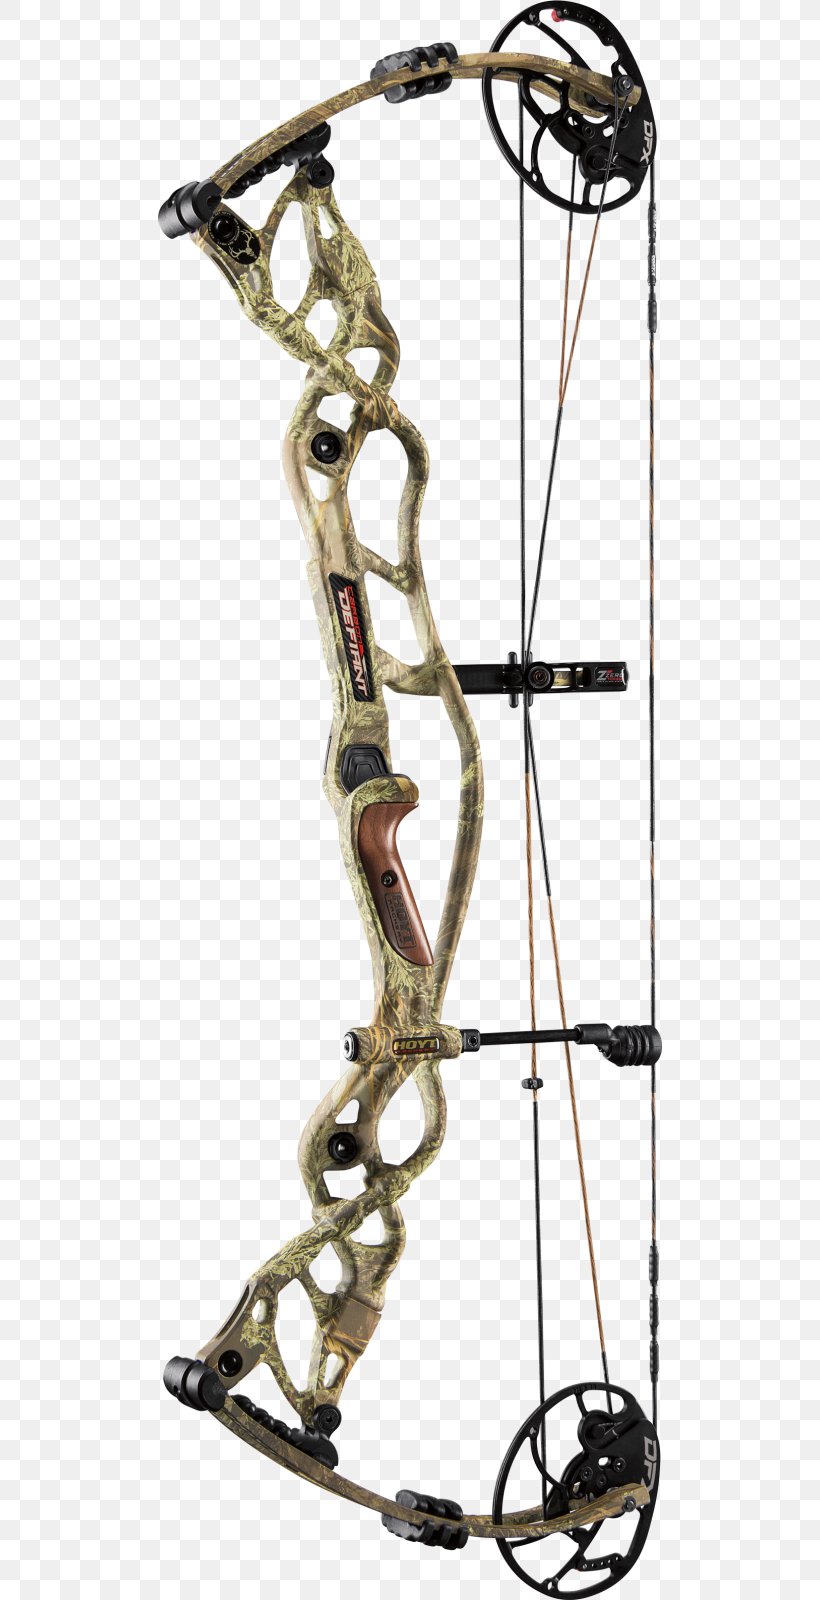 Compound Bows Cam Archery Bowhunting Bow And Arrow, PNG, 504x1600px, Compound Bows, Archery, Bit, Bow, Bow And Arrow Download Free